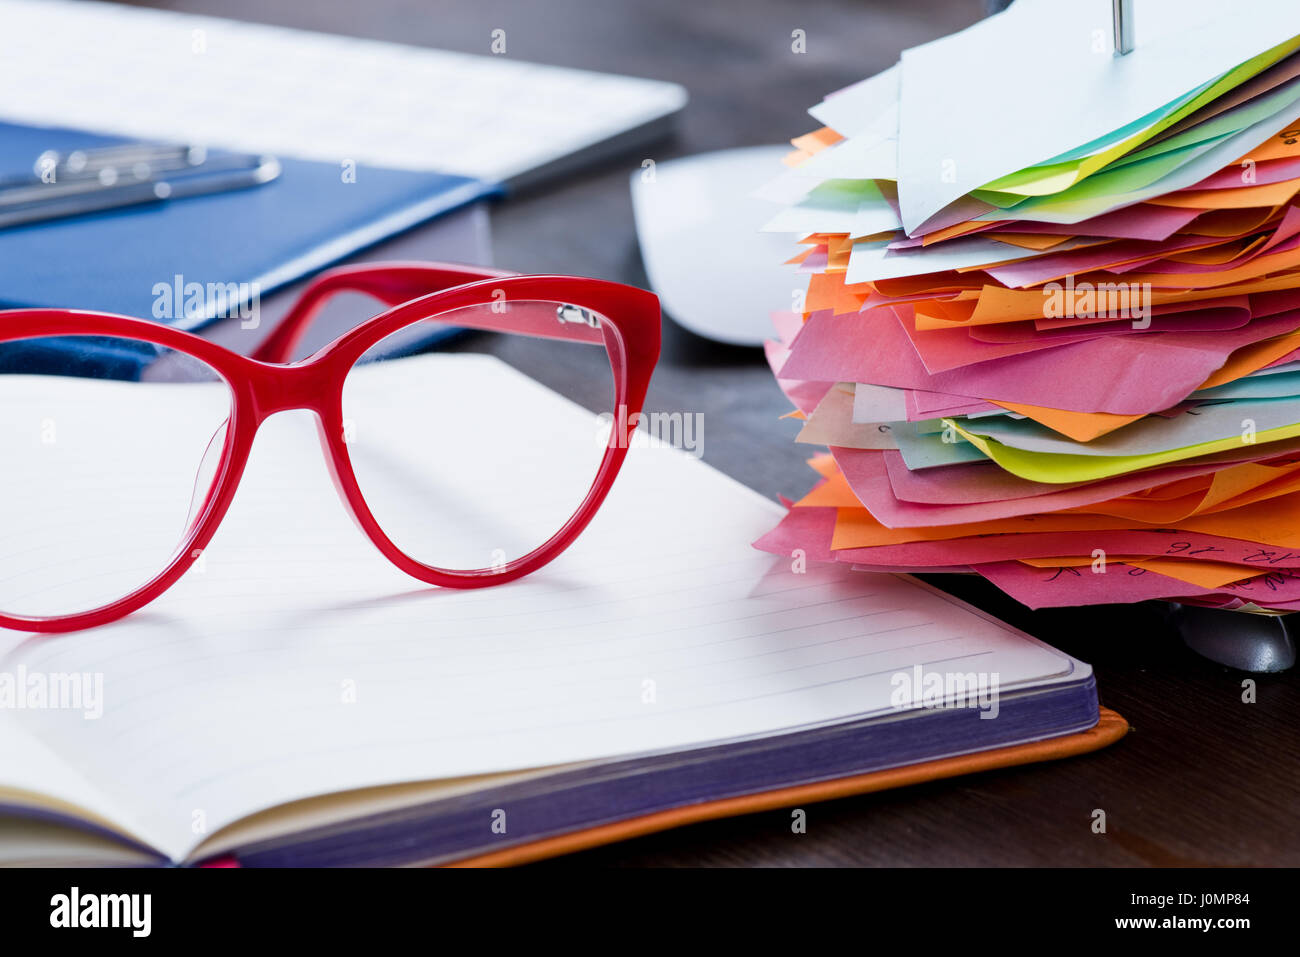 Close-up view of red eyeglasses on open notebook and office supplies at workplace Stock Photo